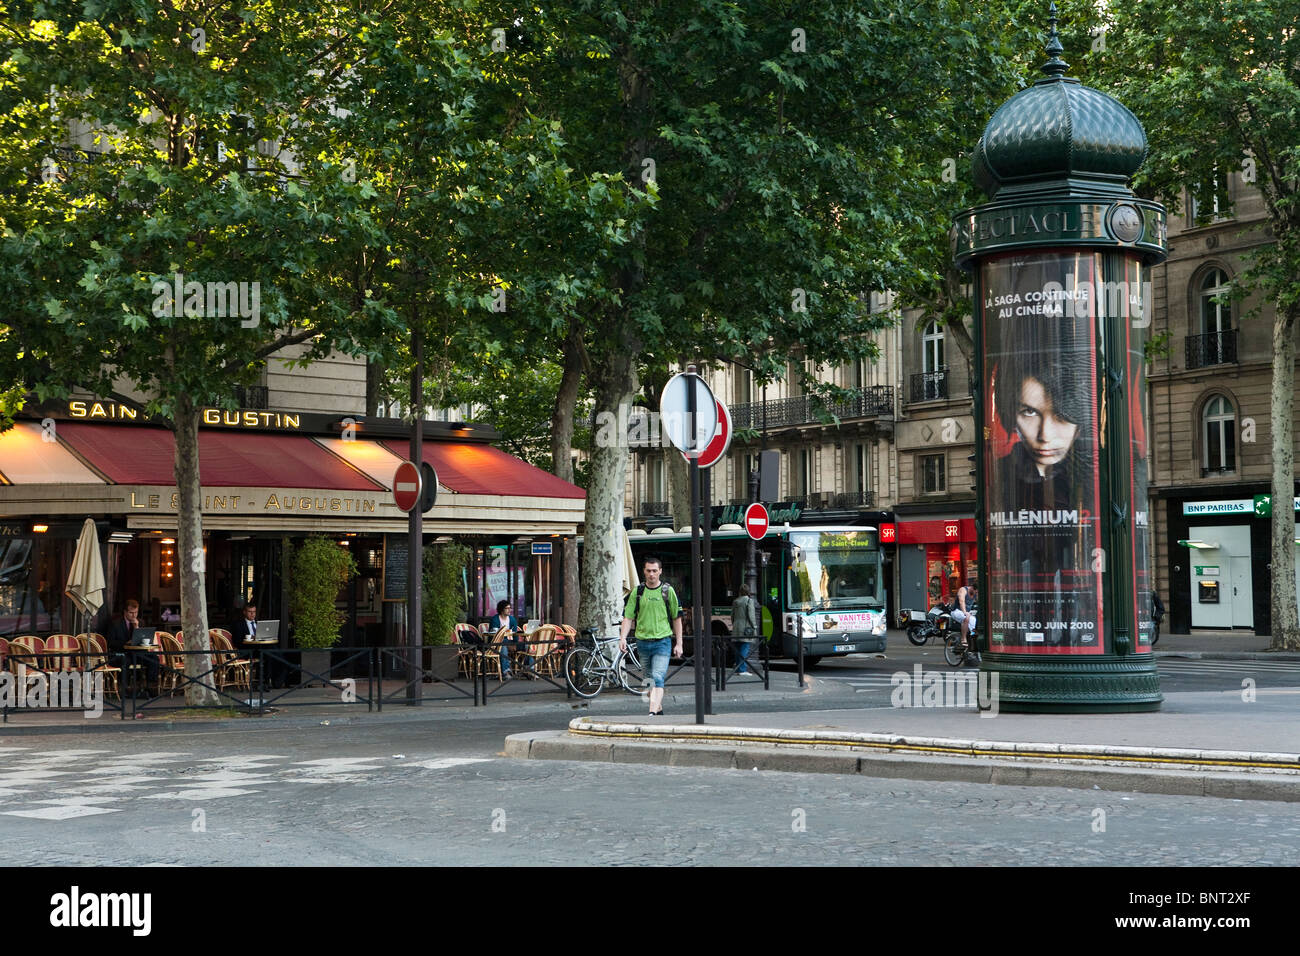 Paris outdoor scene of place st austin with cafe and advertising column in the morning light Stock Photo